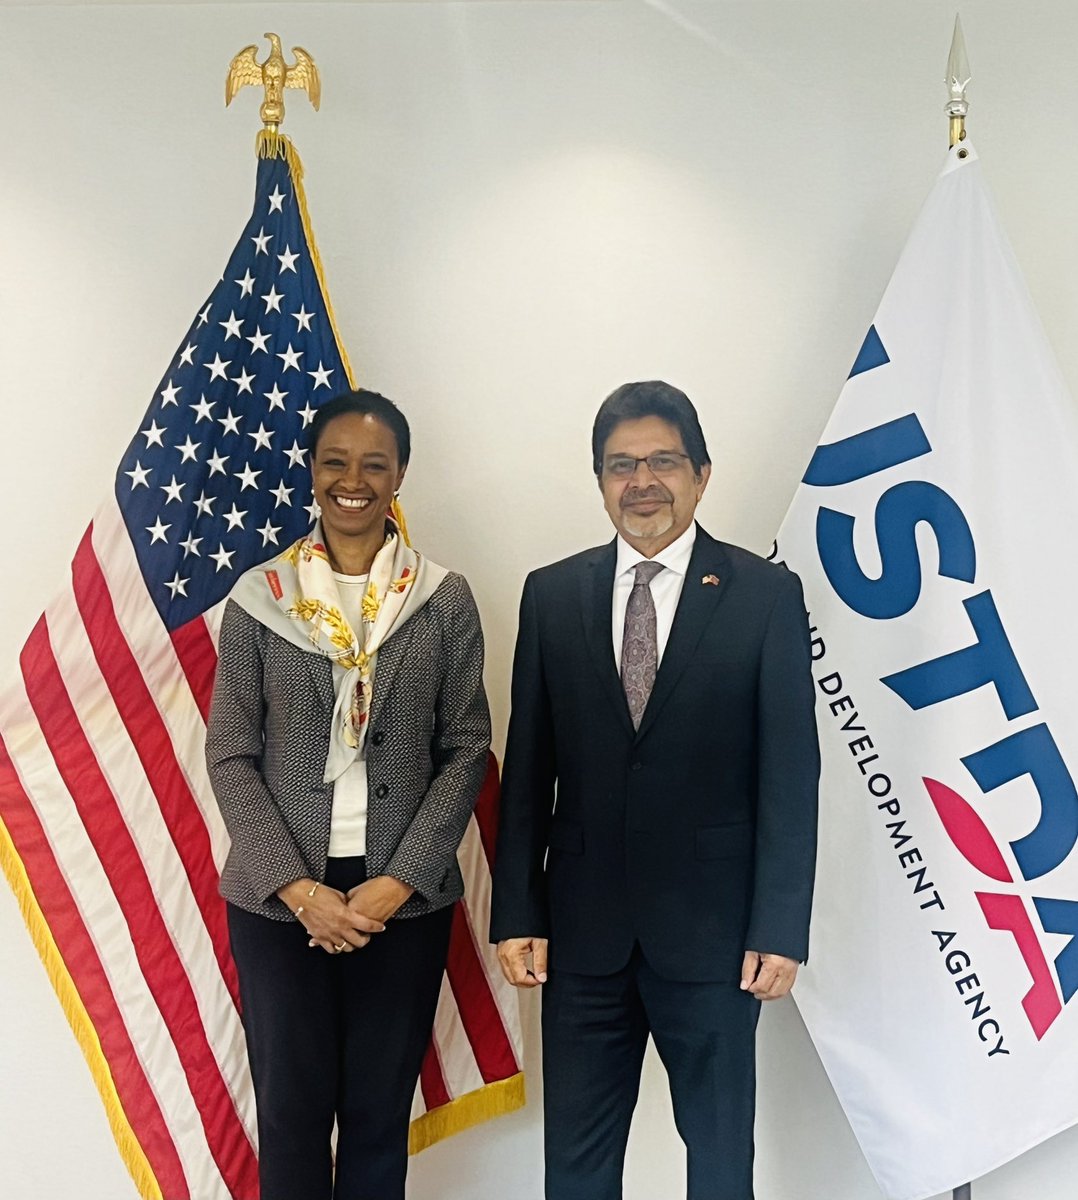 Amb @aghafoormohamed was warmly welcomed by @USTDA_Director Ms. Enoh T. Ebong to @USTDA office. Explored possible partnerships with #Maldives and US Trade and Development Agency.